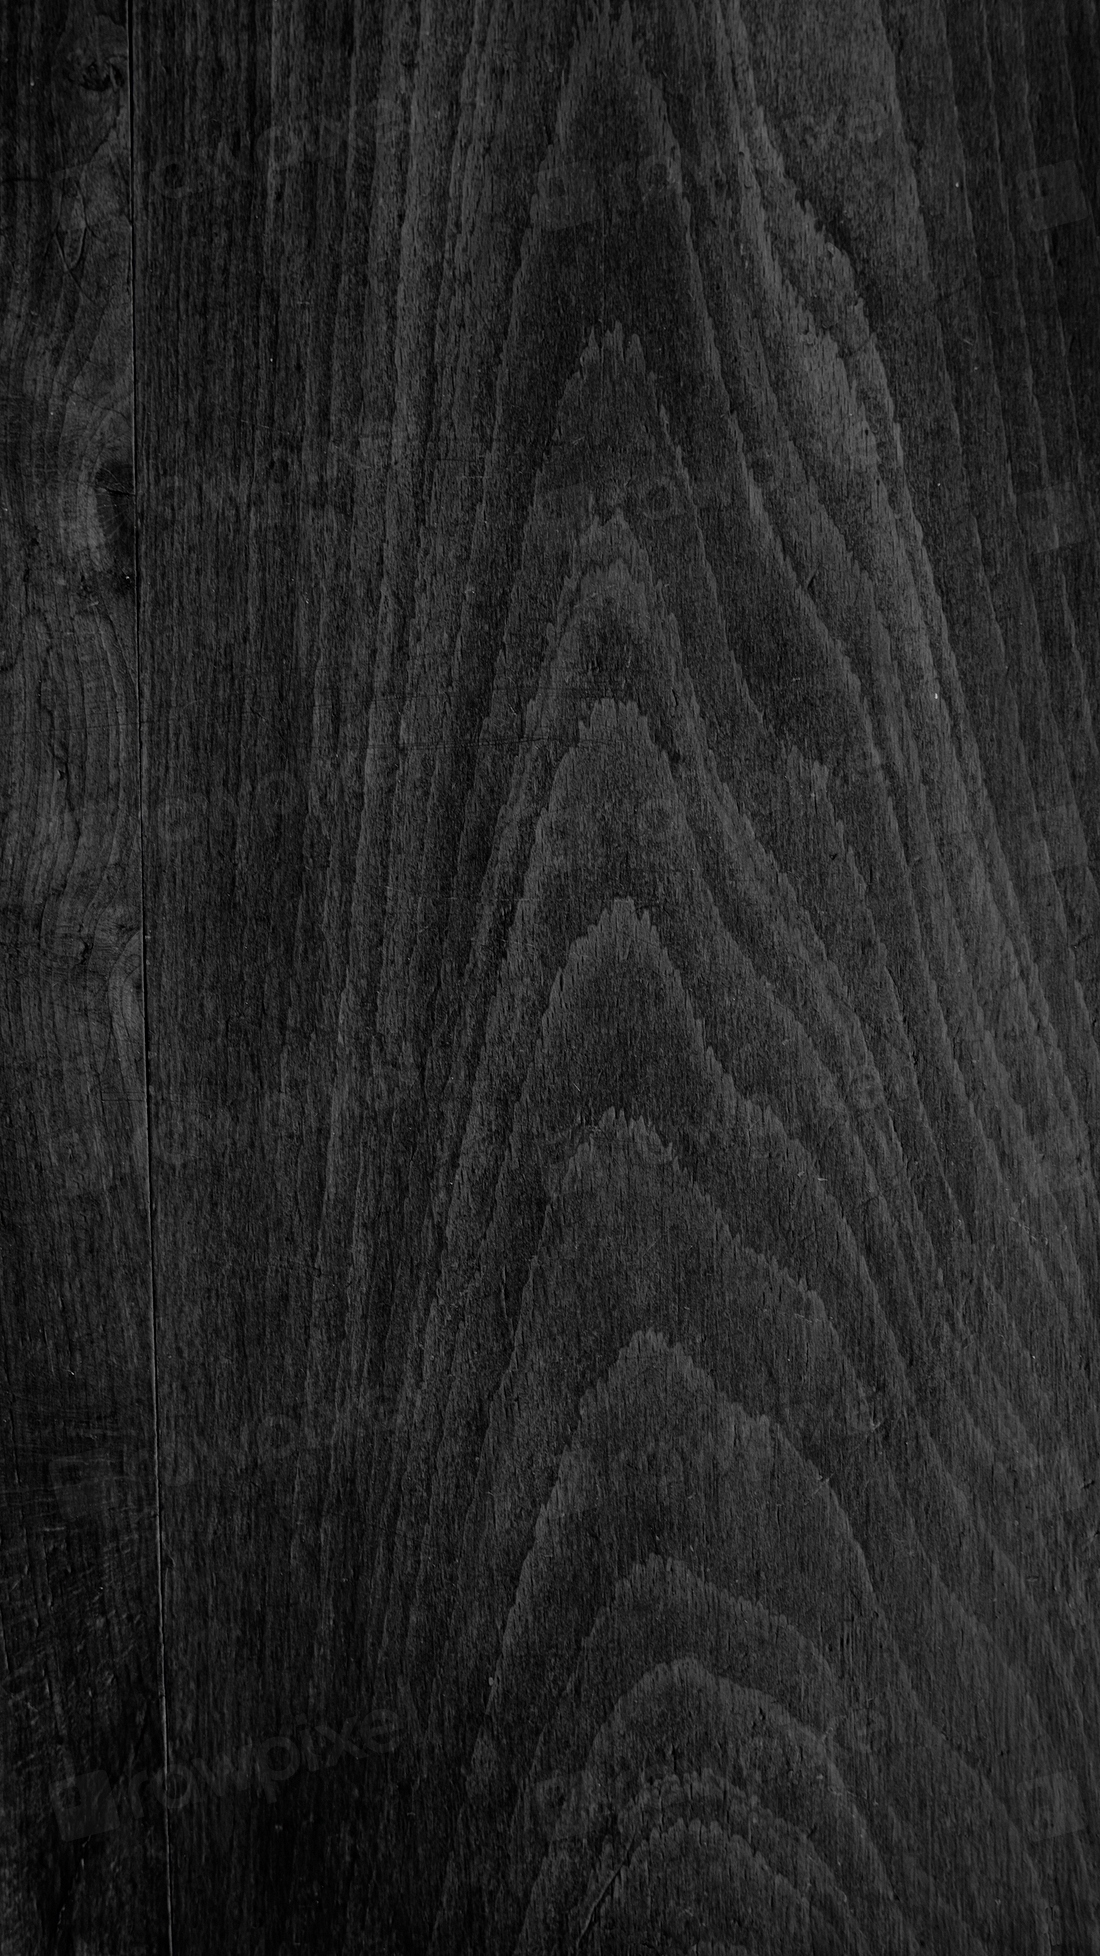 Blank black wooden textured mobile | Free Photo - rawpixel